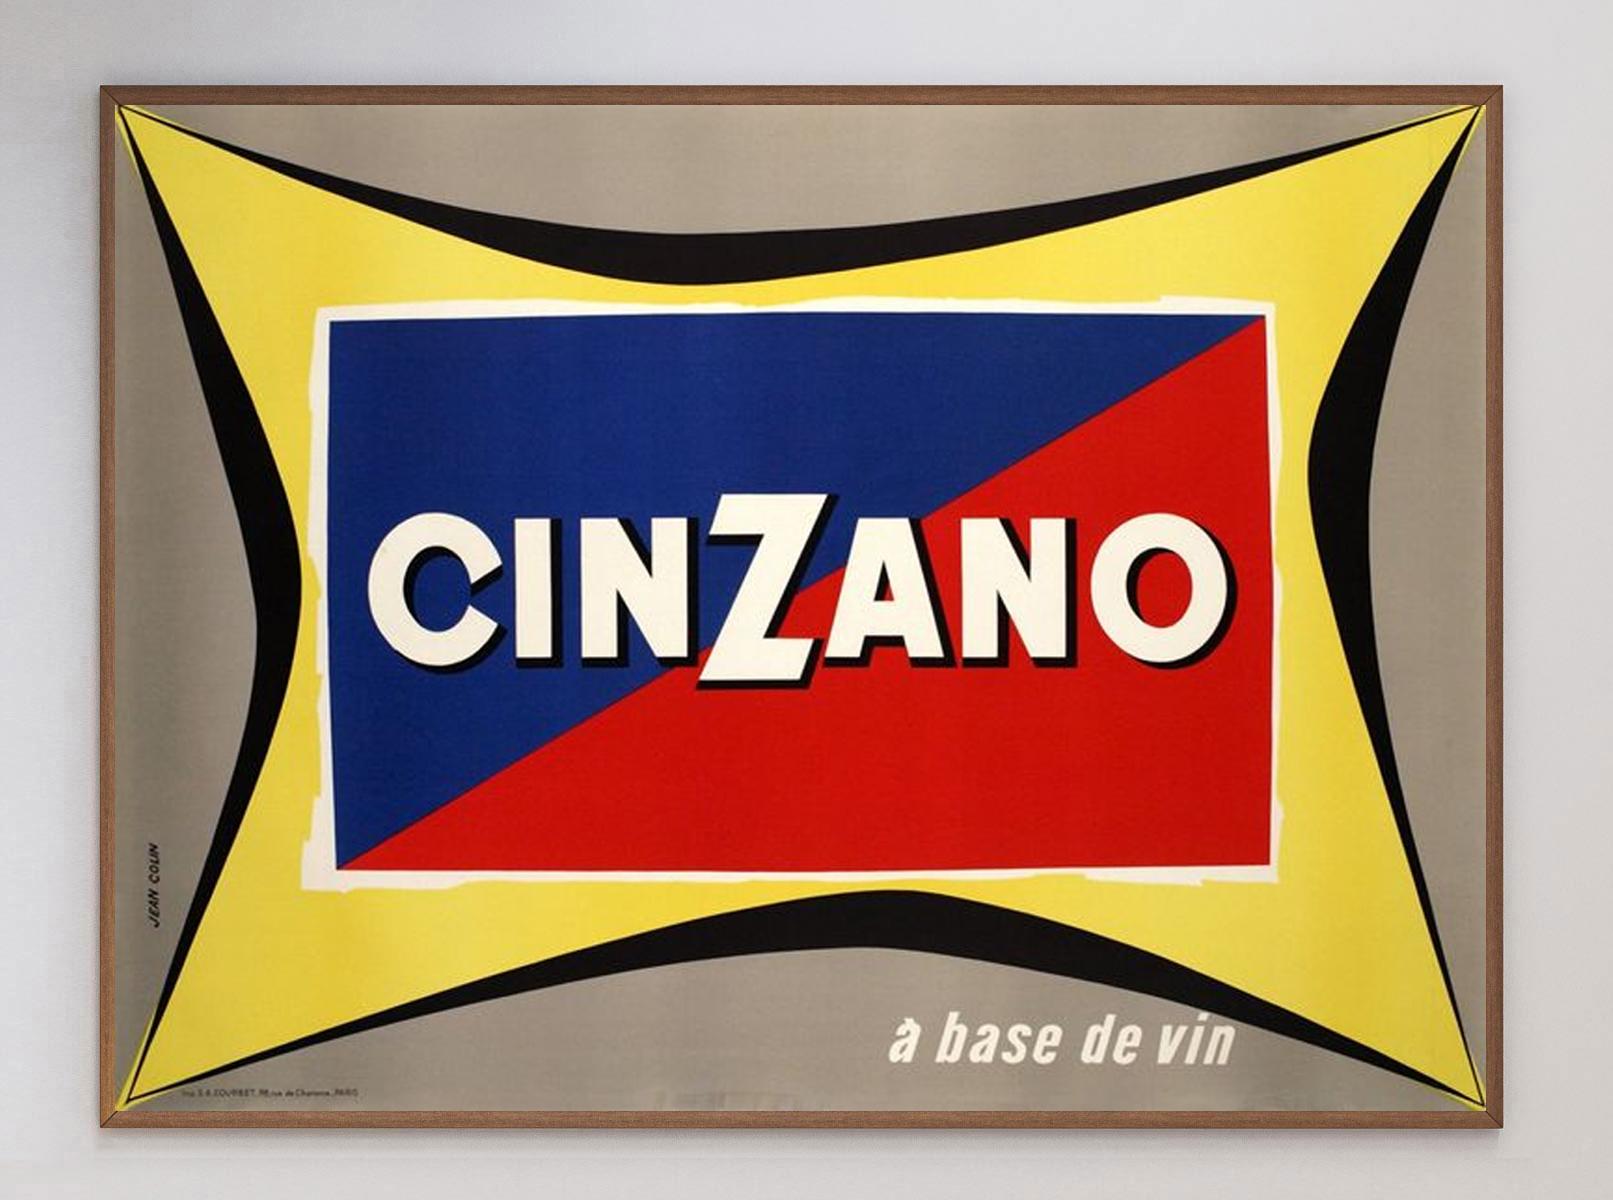 Dating back to 1757, Cinzano is an iconic brand synonymous with the likes of Casanova. A family run business until 1985 (now owned by Campari), the famous vermouth drink from Turin is well known for its advertisements including the likes of Joan